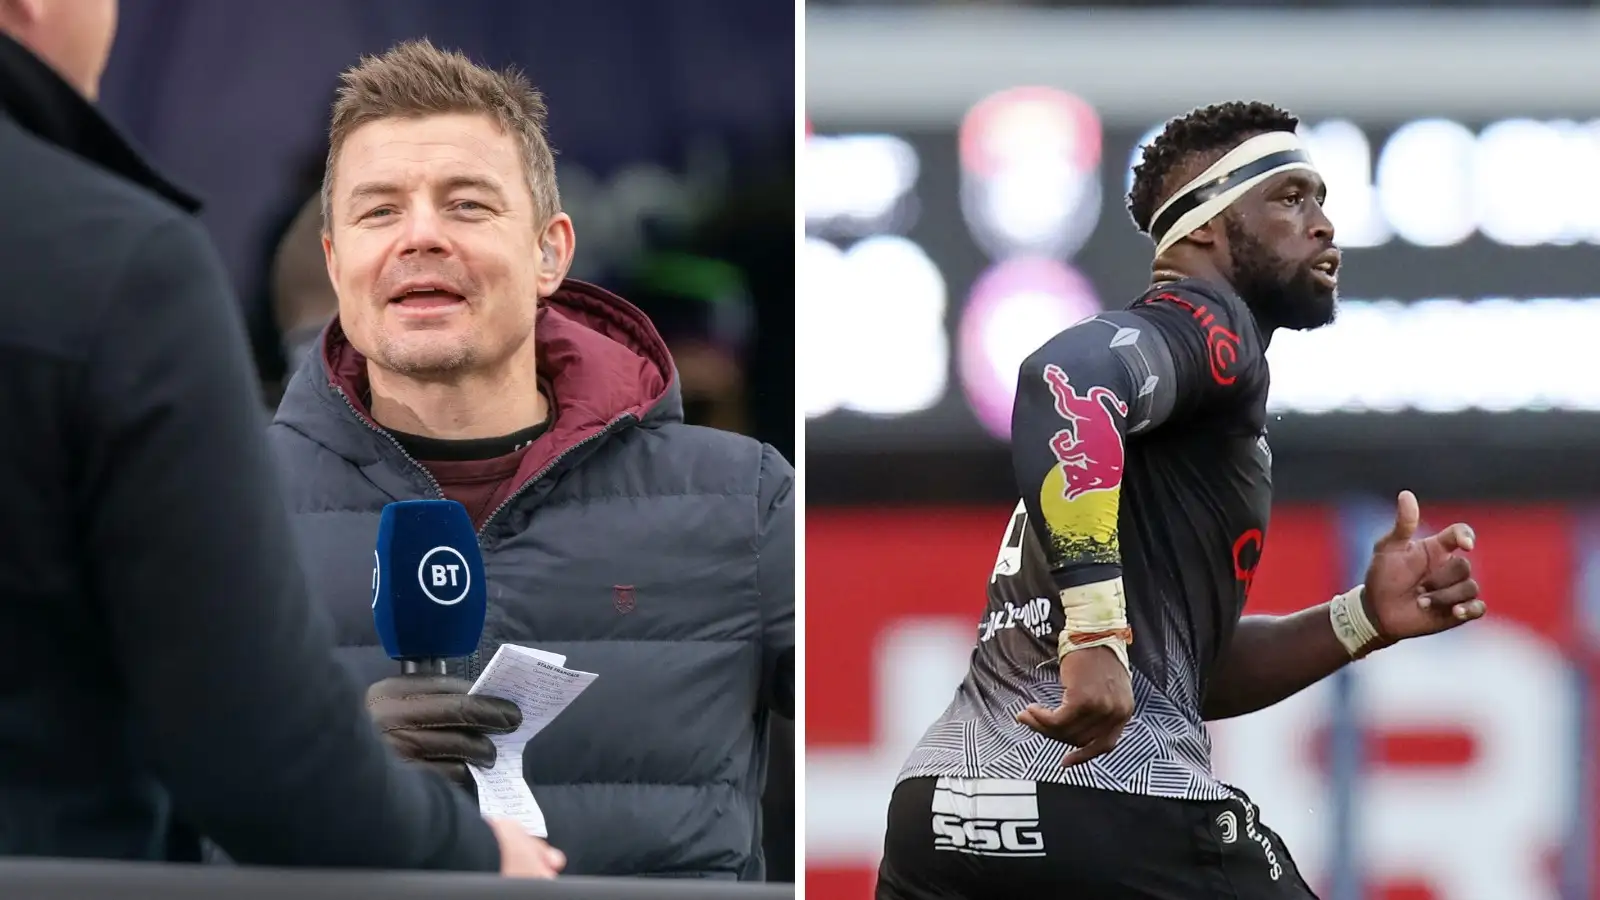 The inclusion of the three South African sides to the top flight of European rugby was met with some criticism, but the trio have enjoyed a rapid start to their Champions Cup journeys. The Sharks booked their place in the knockouts, while the Stormers and Bulls are on the verge of doing the same this weekend. Brian O'Driscoll 